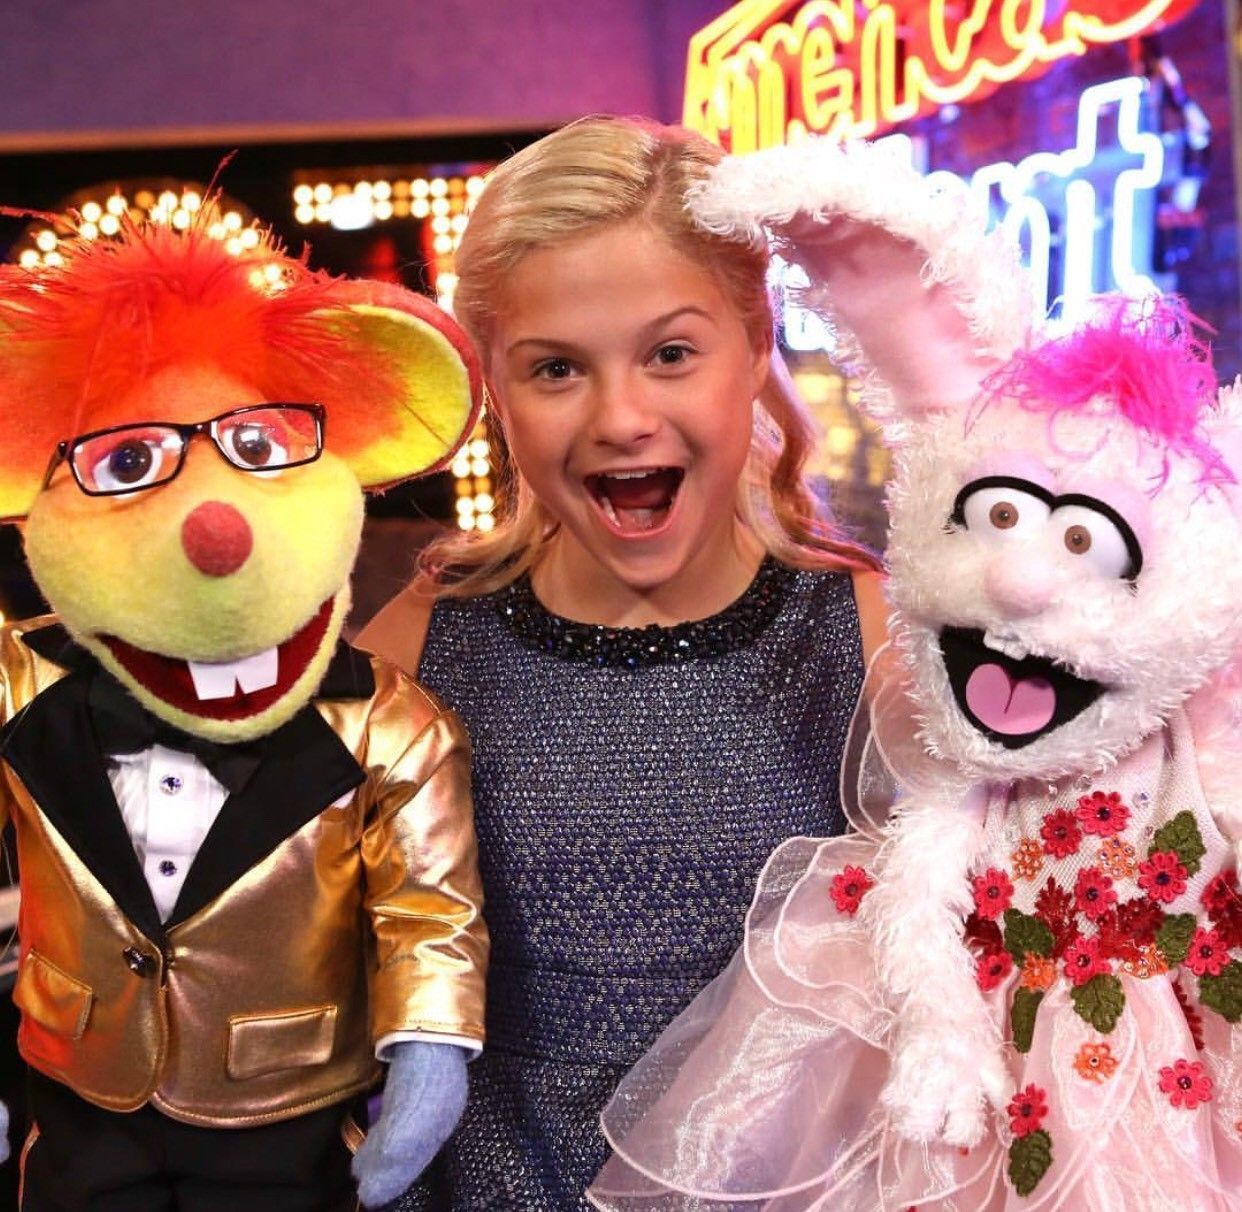 Ventriloquist Darci Lynne Farmer stars in the holiday special "My Hometown Christmas" at 9 p.m. Tuesday on NBC.